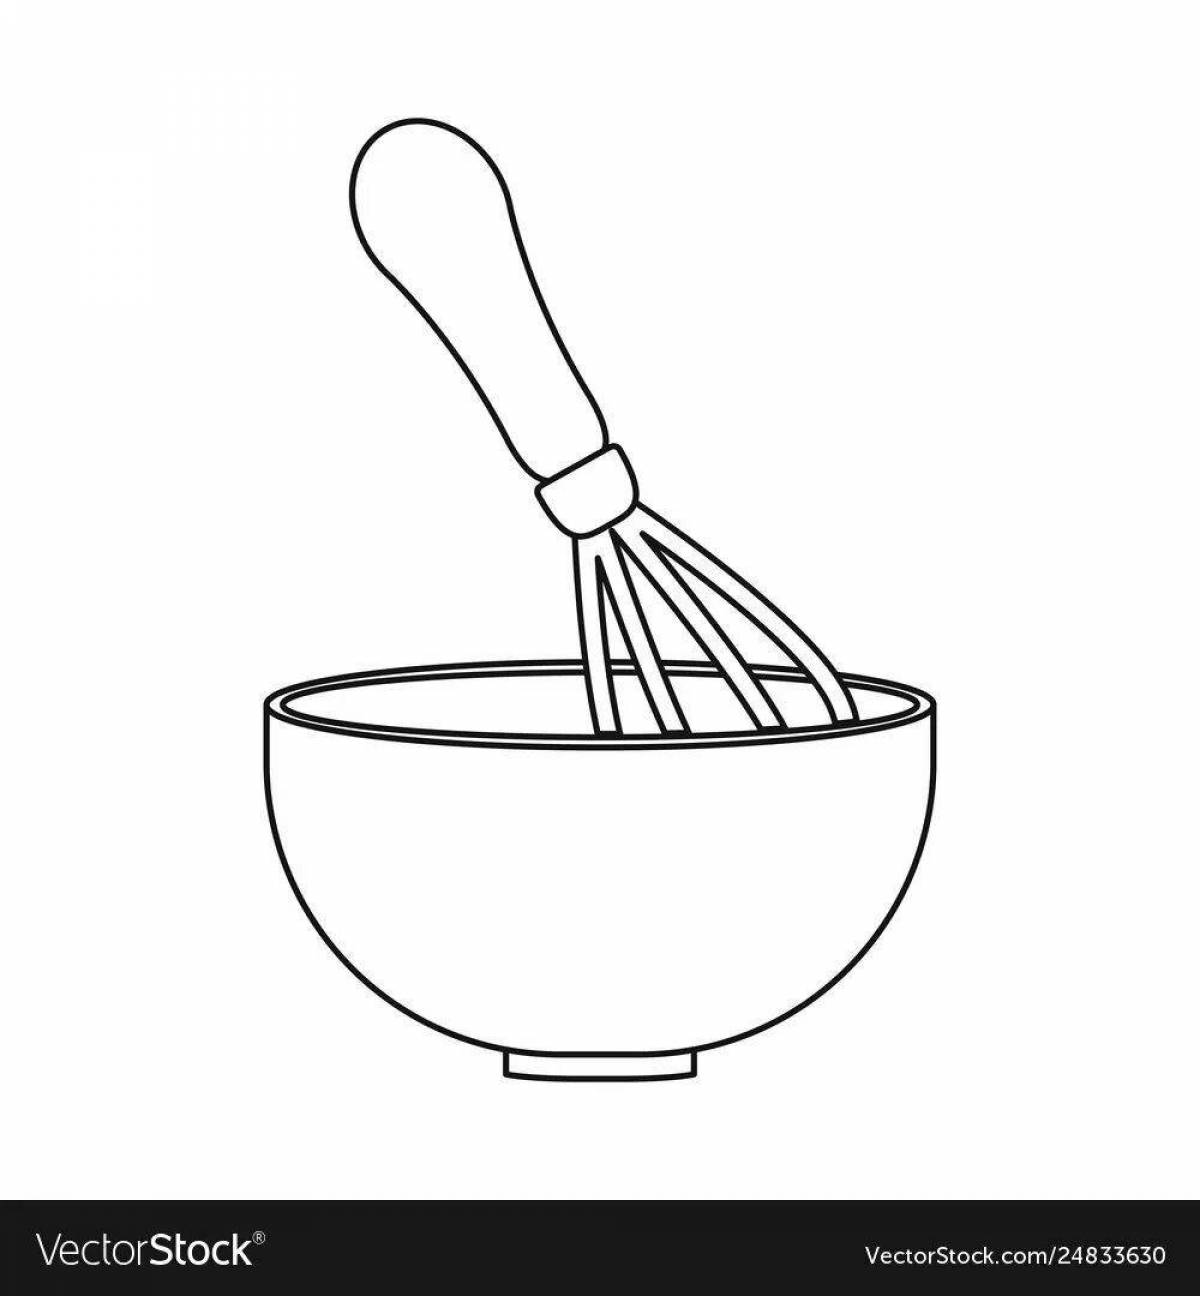 Coloring ladle for the little ones